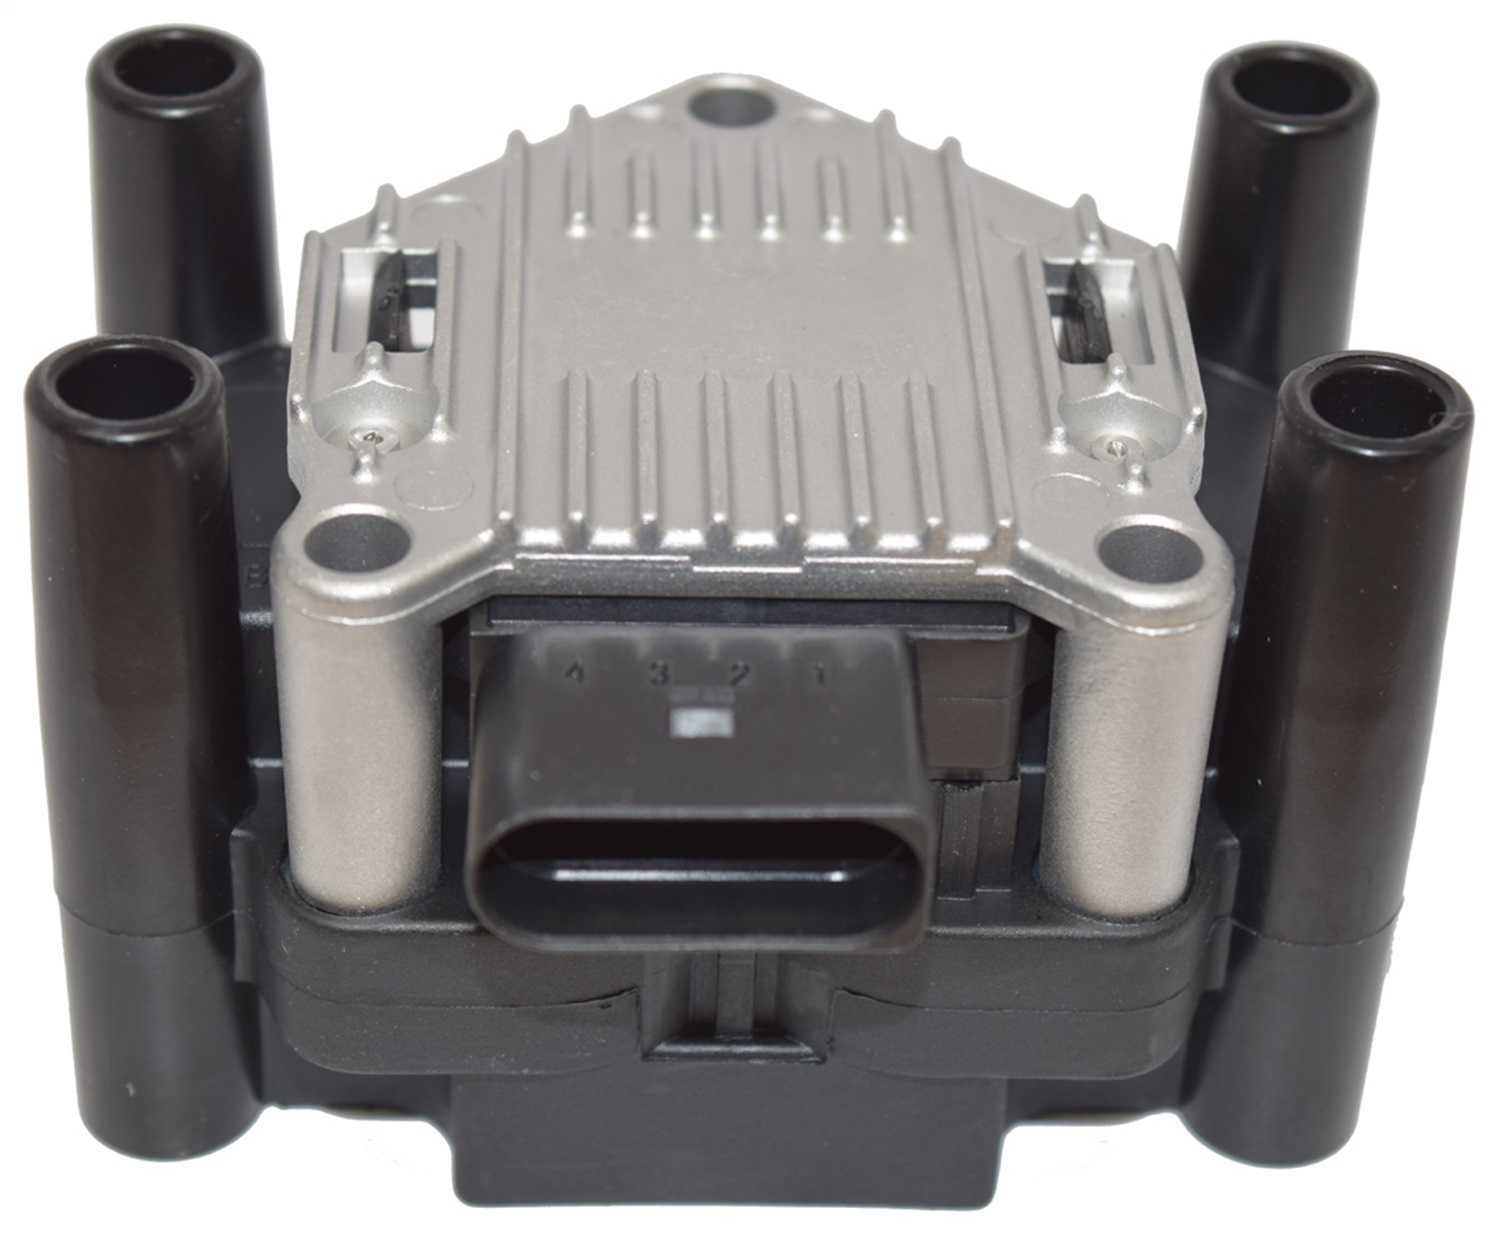 KARLYN/STI - Karlyn-STI Ignition Coil Pack - KLY 5012